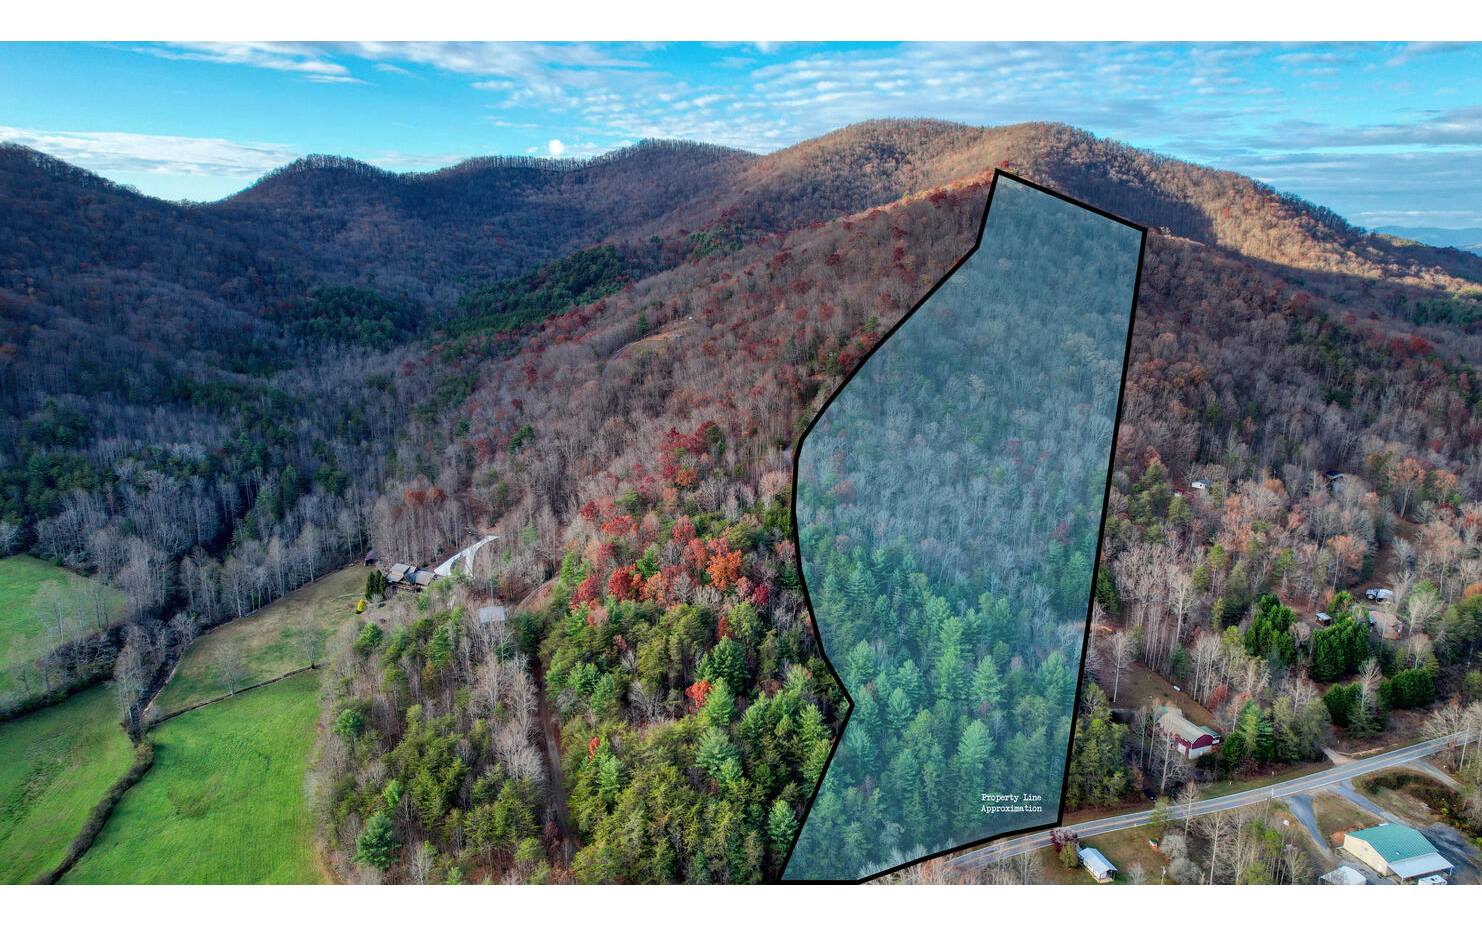 15.59 UNRESTRICTED acres with long range mountain views. South facing slope. Spring, cistern and intermittent stream. South of town, easy access to Blairsville, and adjacent to US Forest Service with over 87,000 acres of land to enjoy.